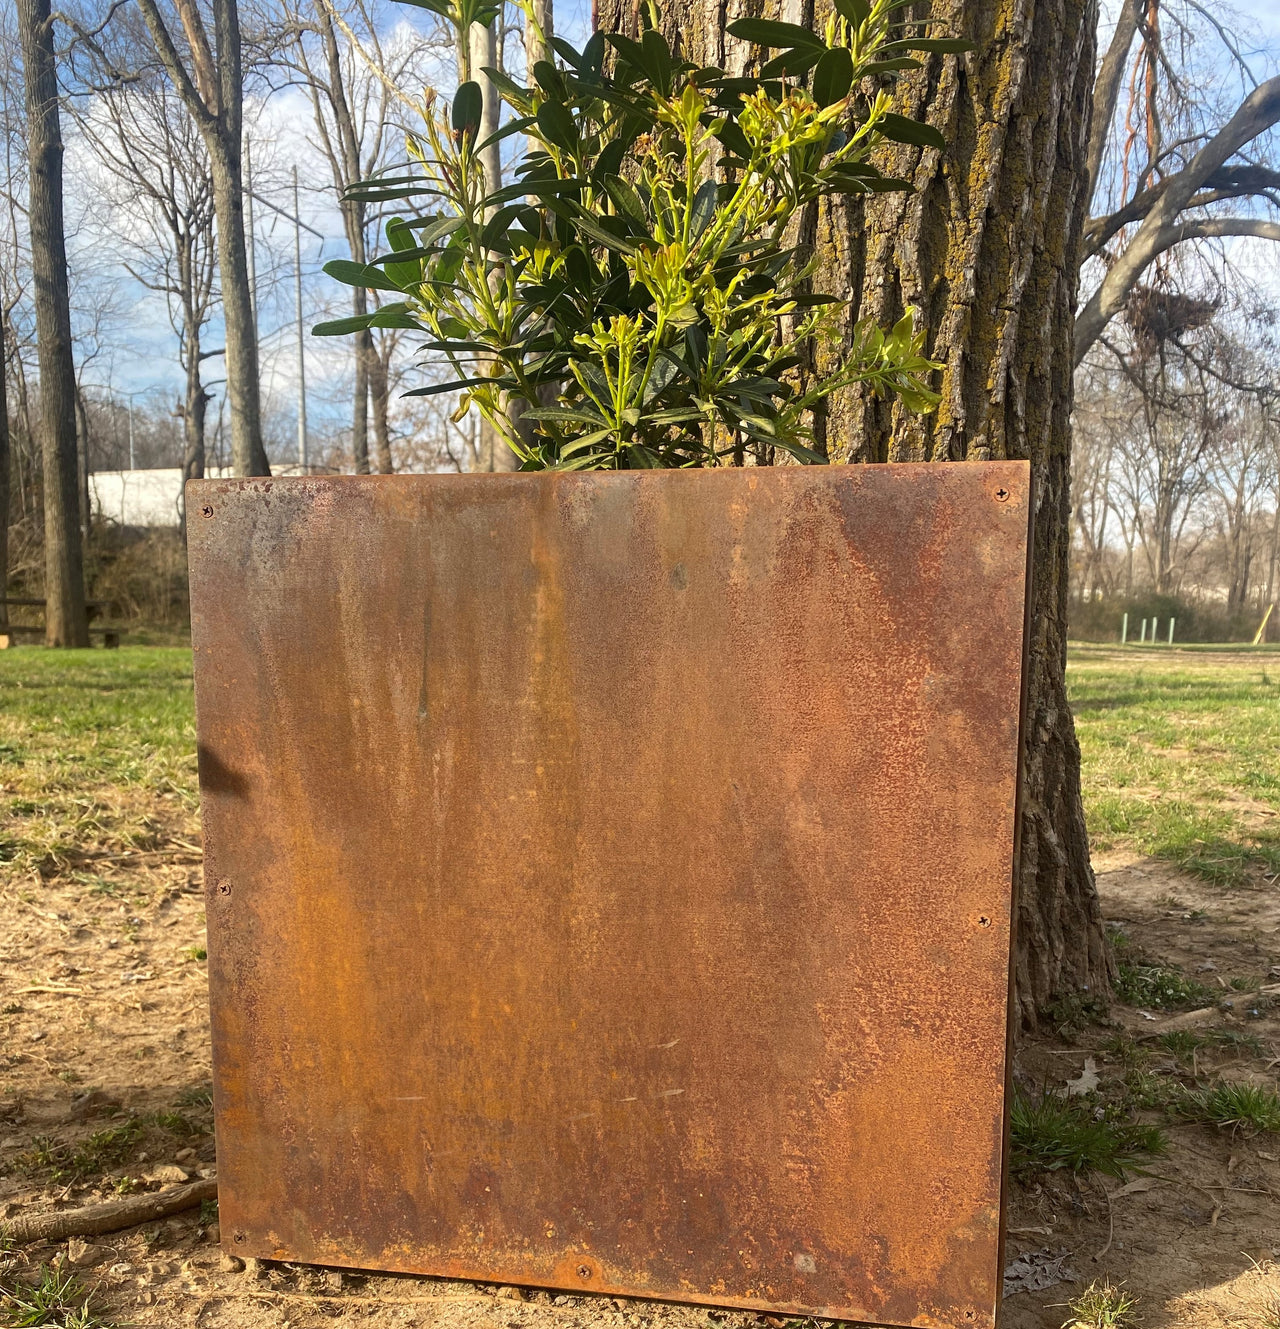 Wholesale Square Metal Planter - 3 Sizes 10" 16" & 22" Large Planter - Planter Pot - Raw Steel With Natural Rusty Patina - Minimalist